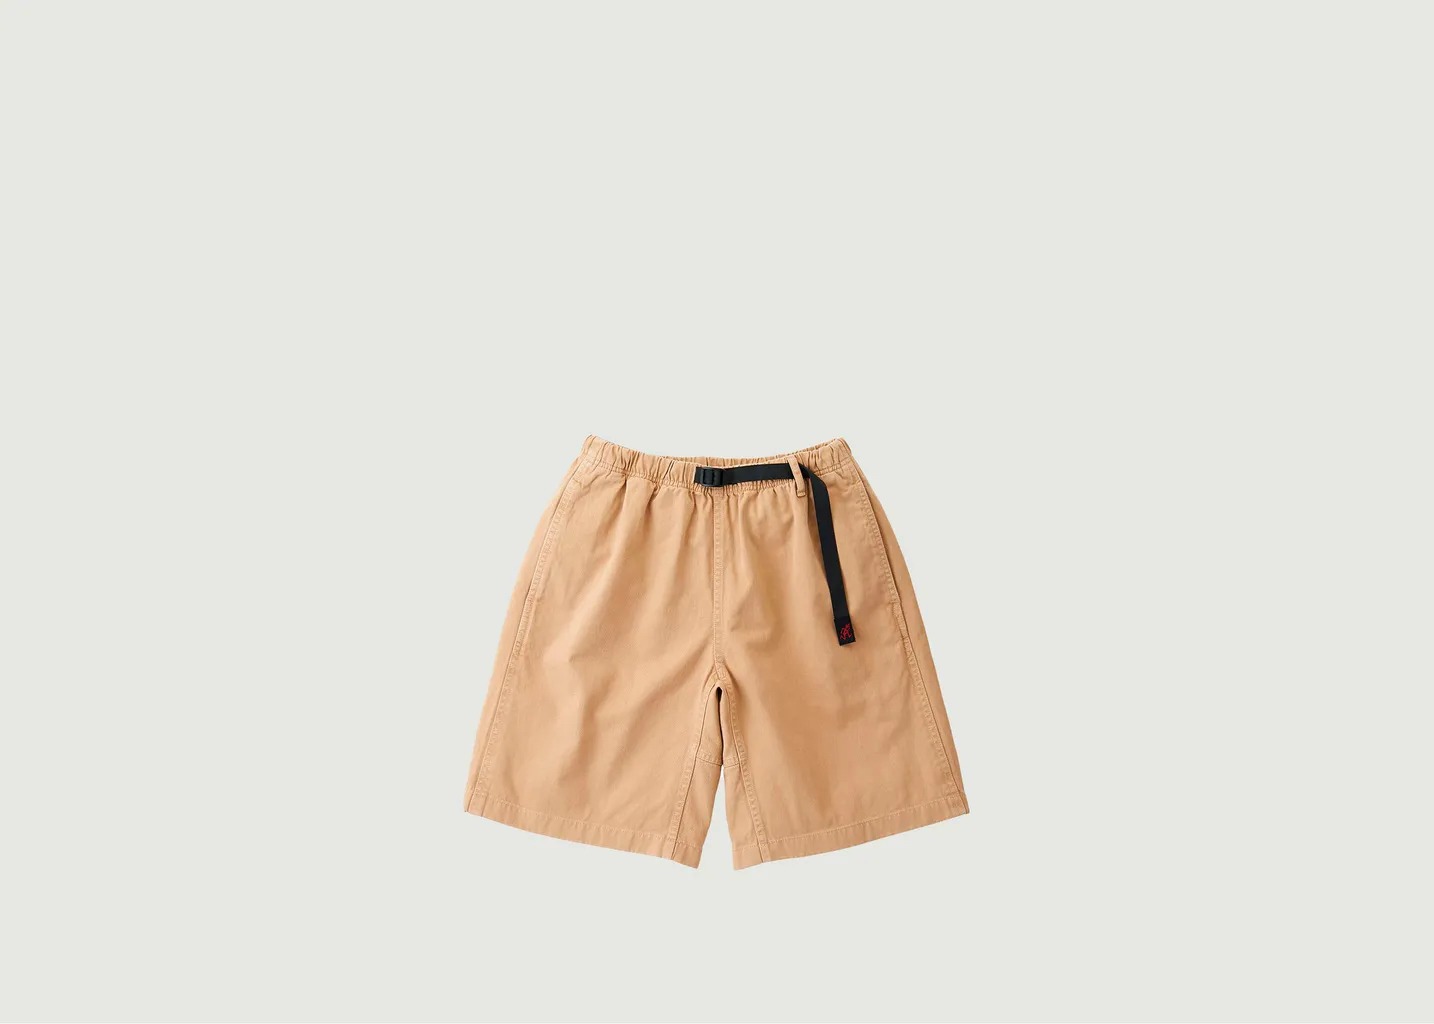 Gramicci G short homme ss23 collection
